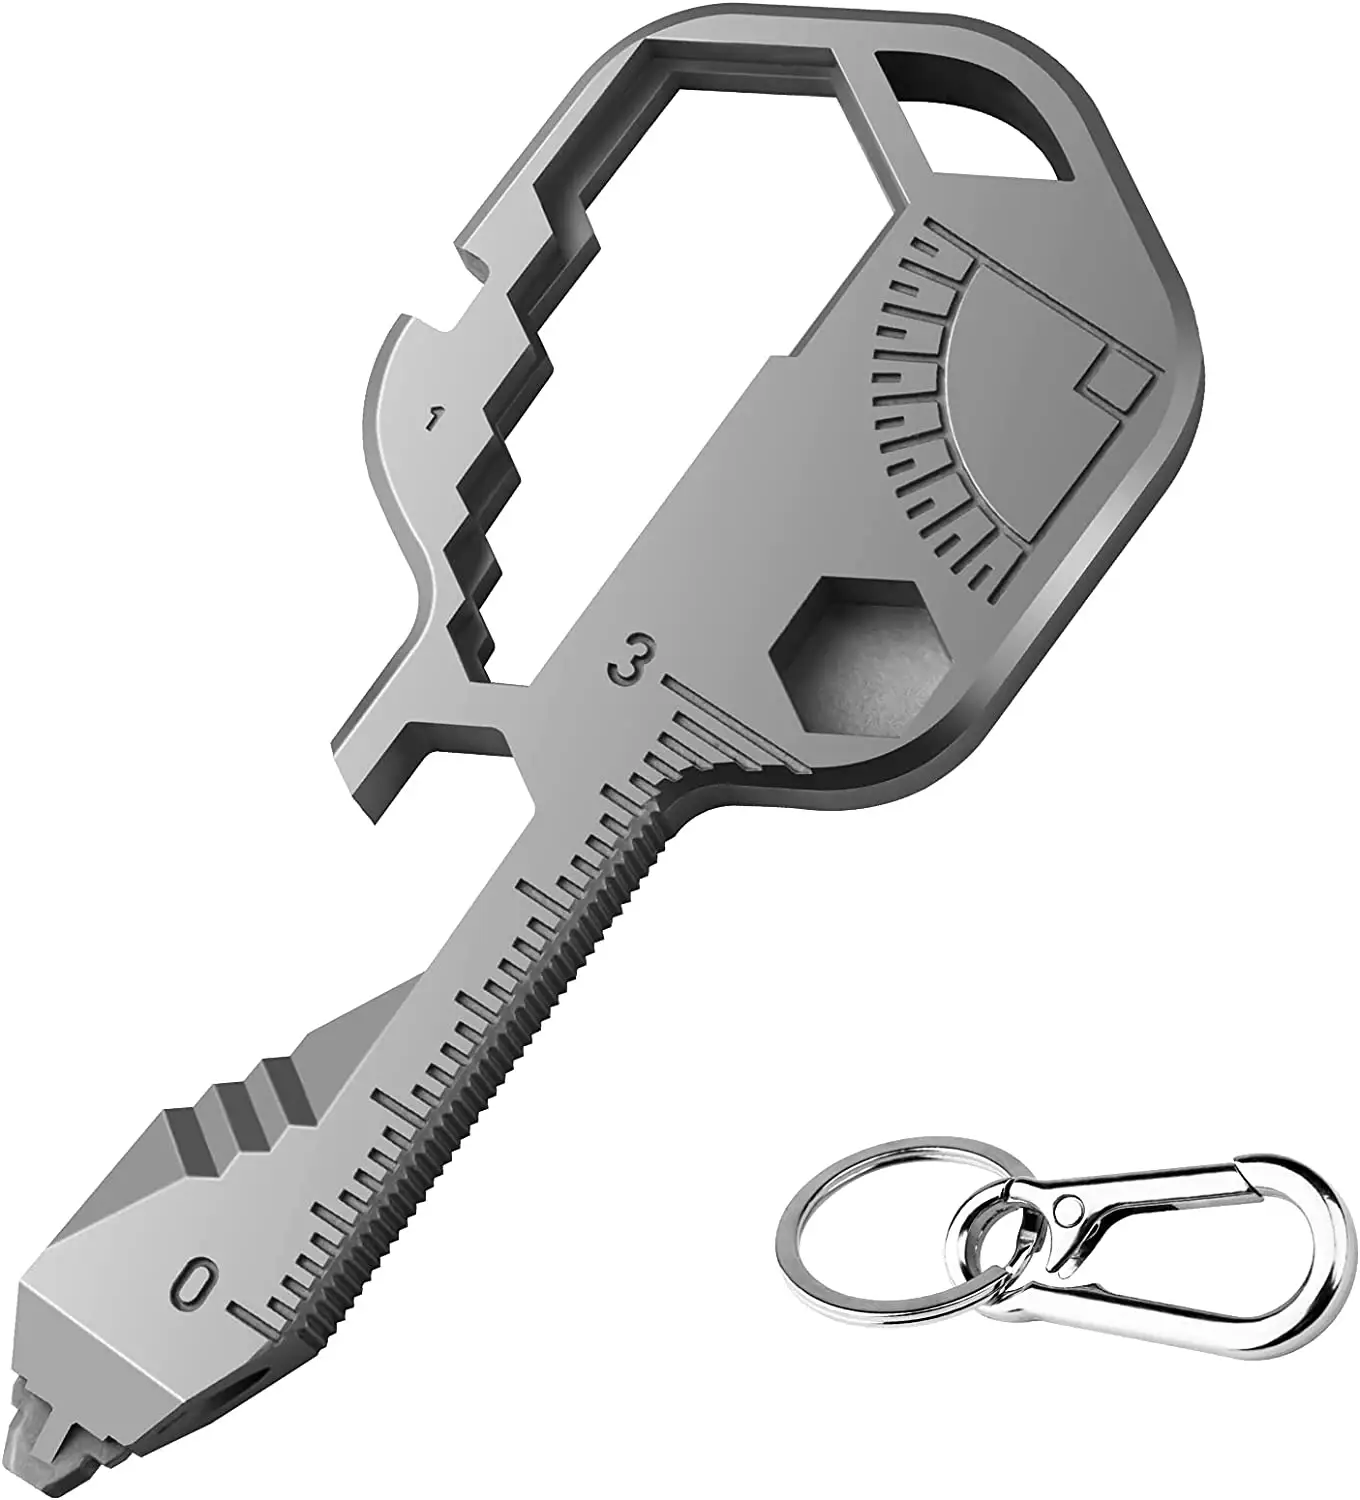 24- in-1 Key Shaped Pocket Tool, multitool key with key chain Outdoor keychain tool for Drill Drive